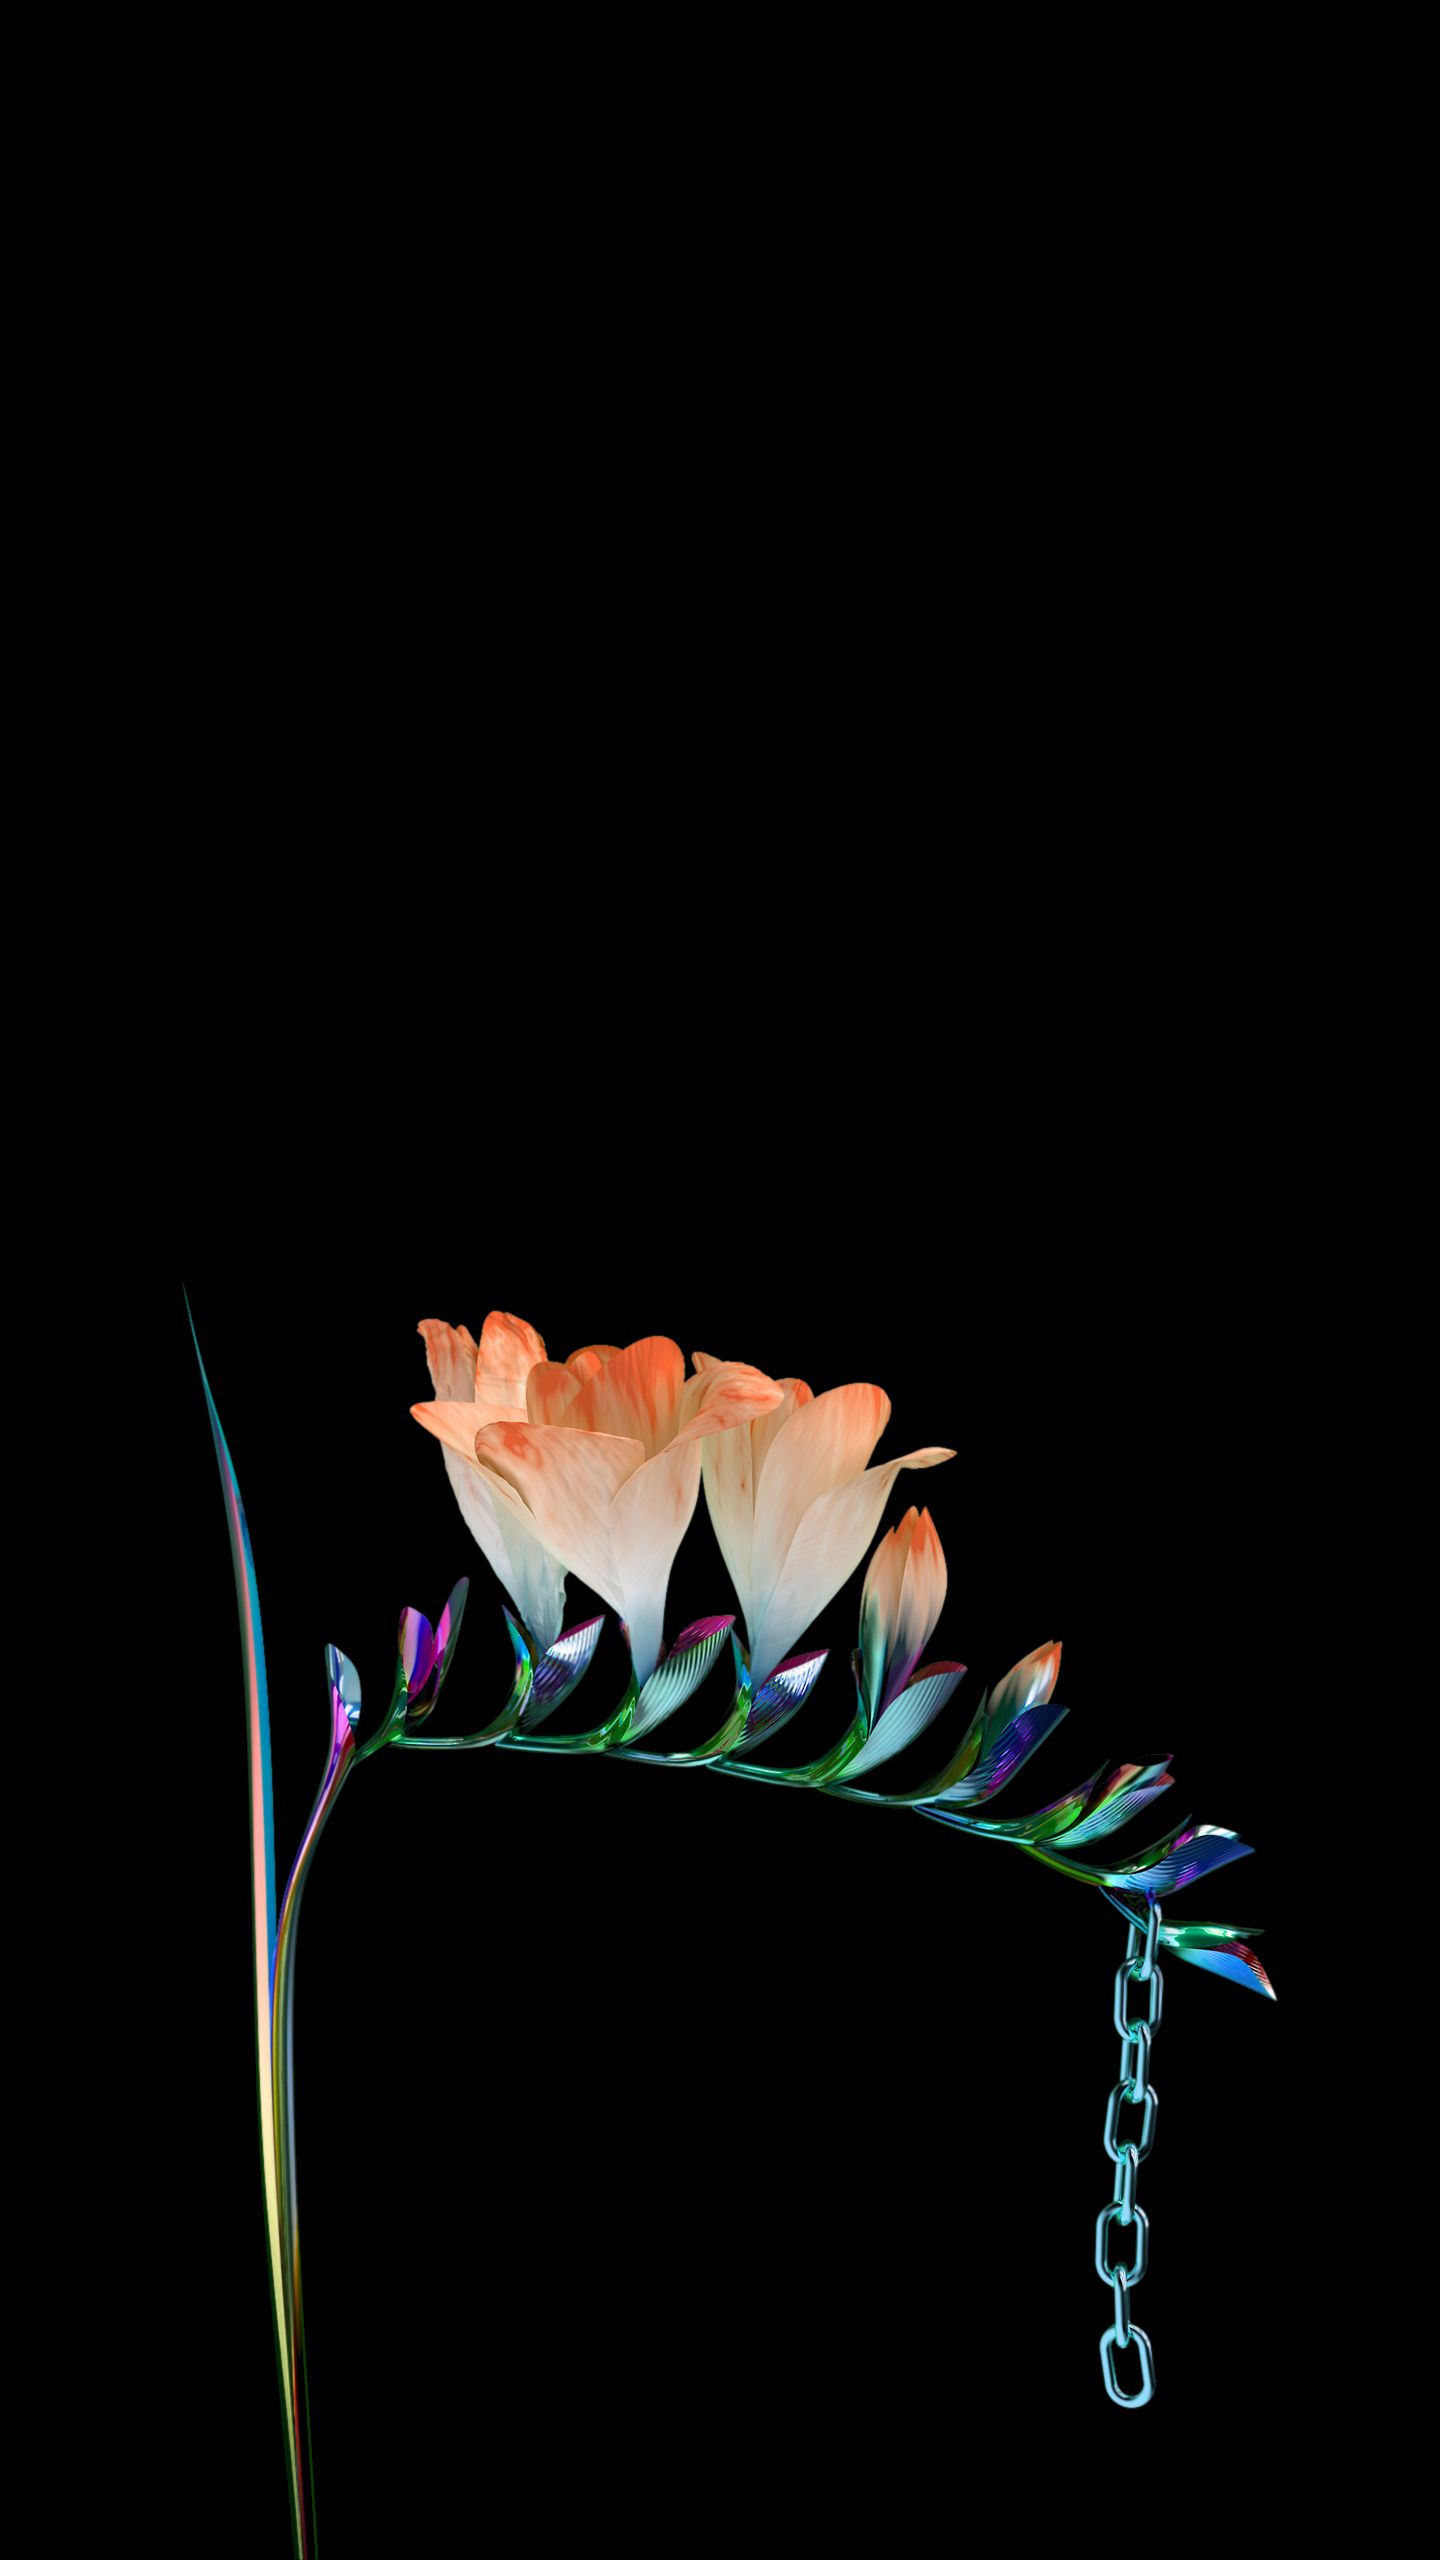 Last background post I swear. 8 different options for AMOLED